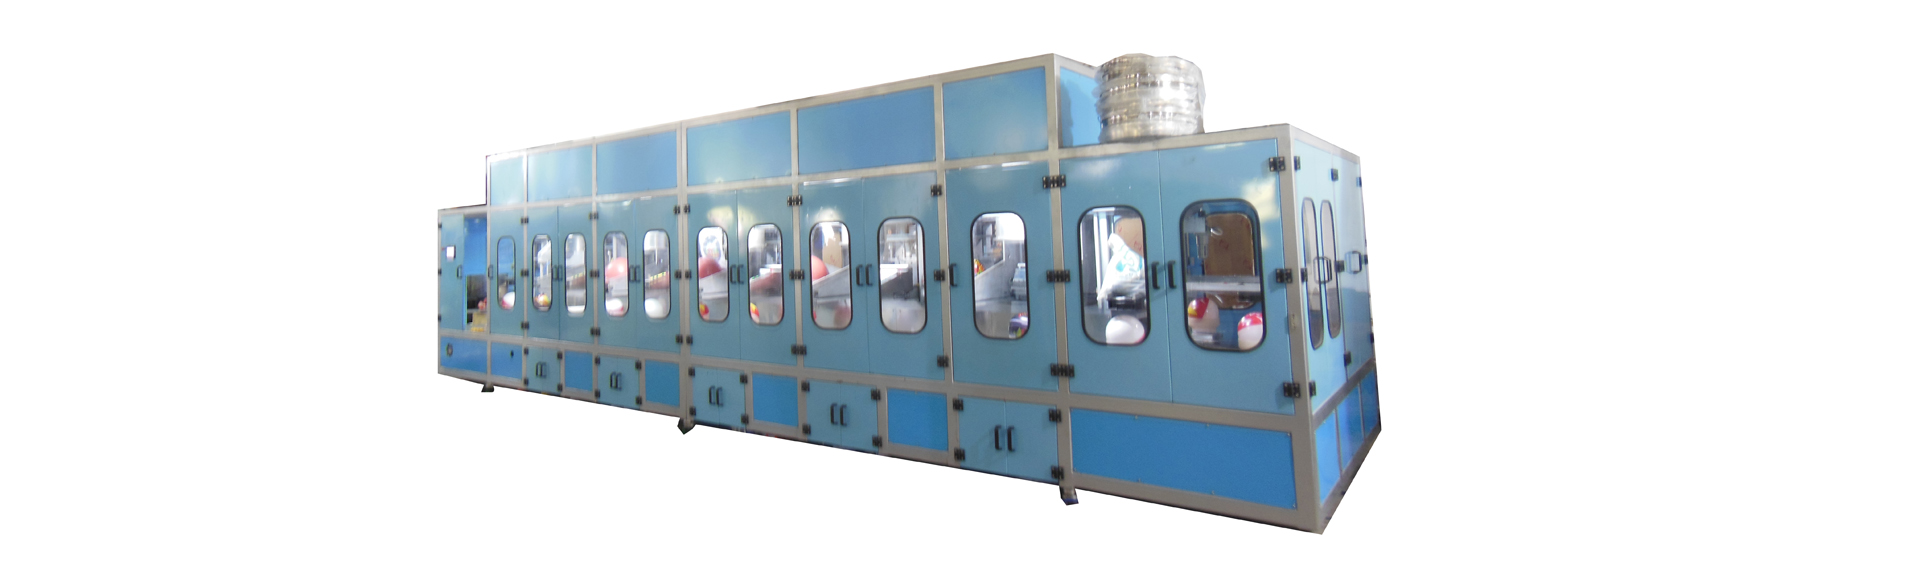 fully automatic 8 color pvc ball pad priting machine equipment